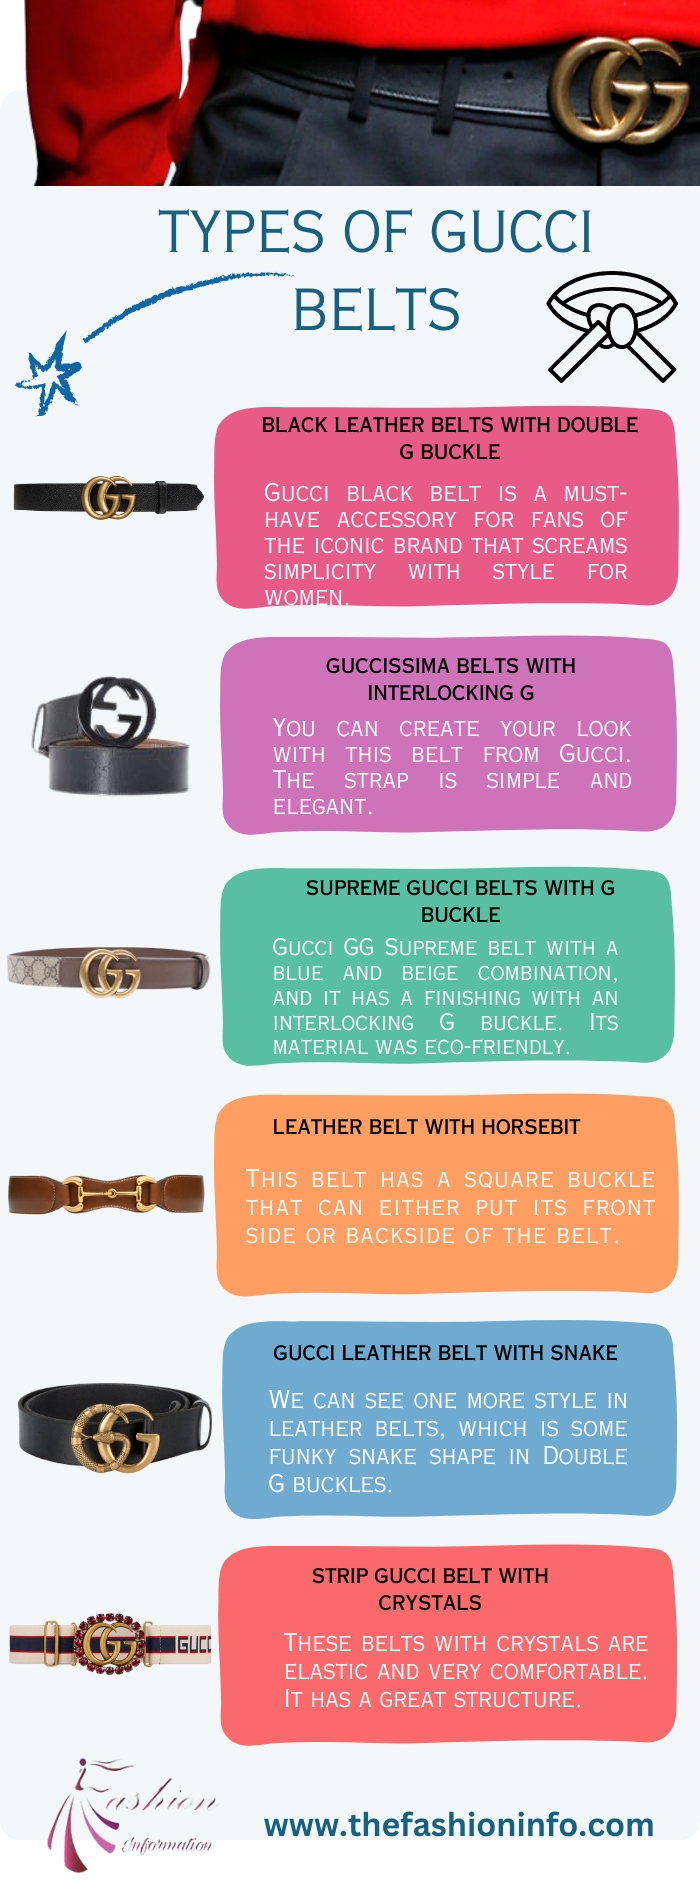 Types of Gucci Belts